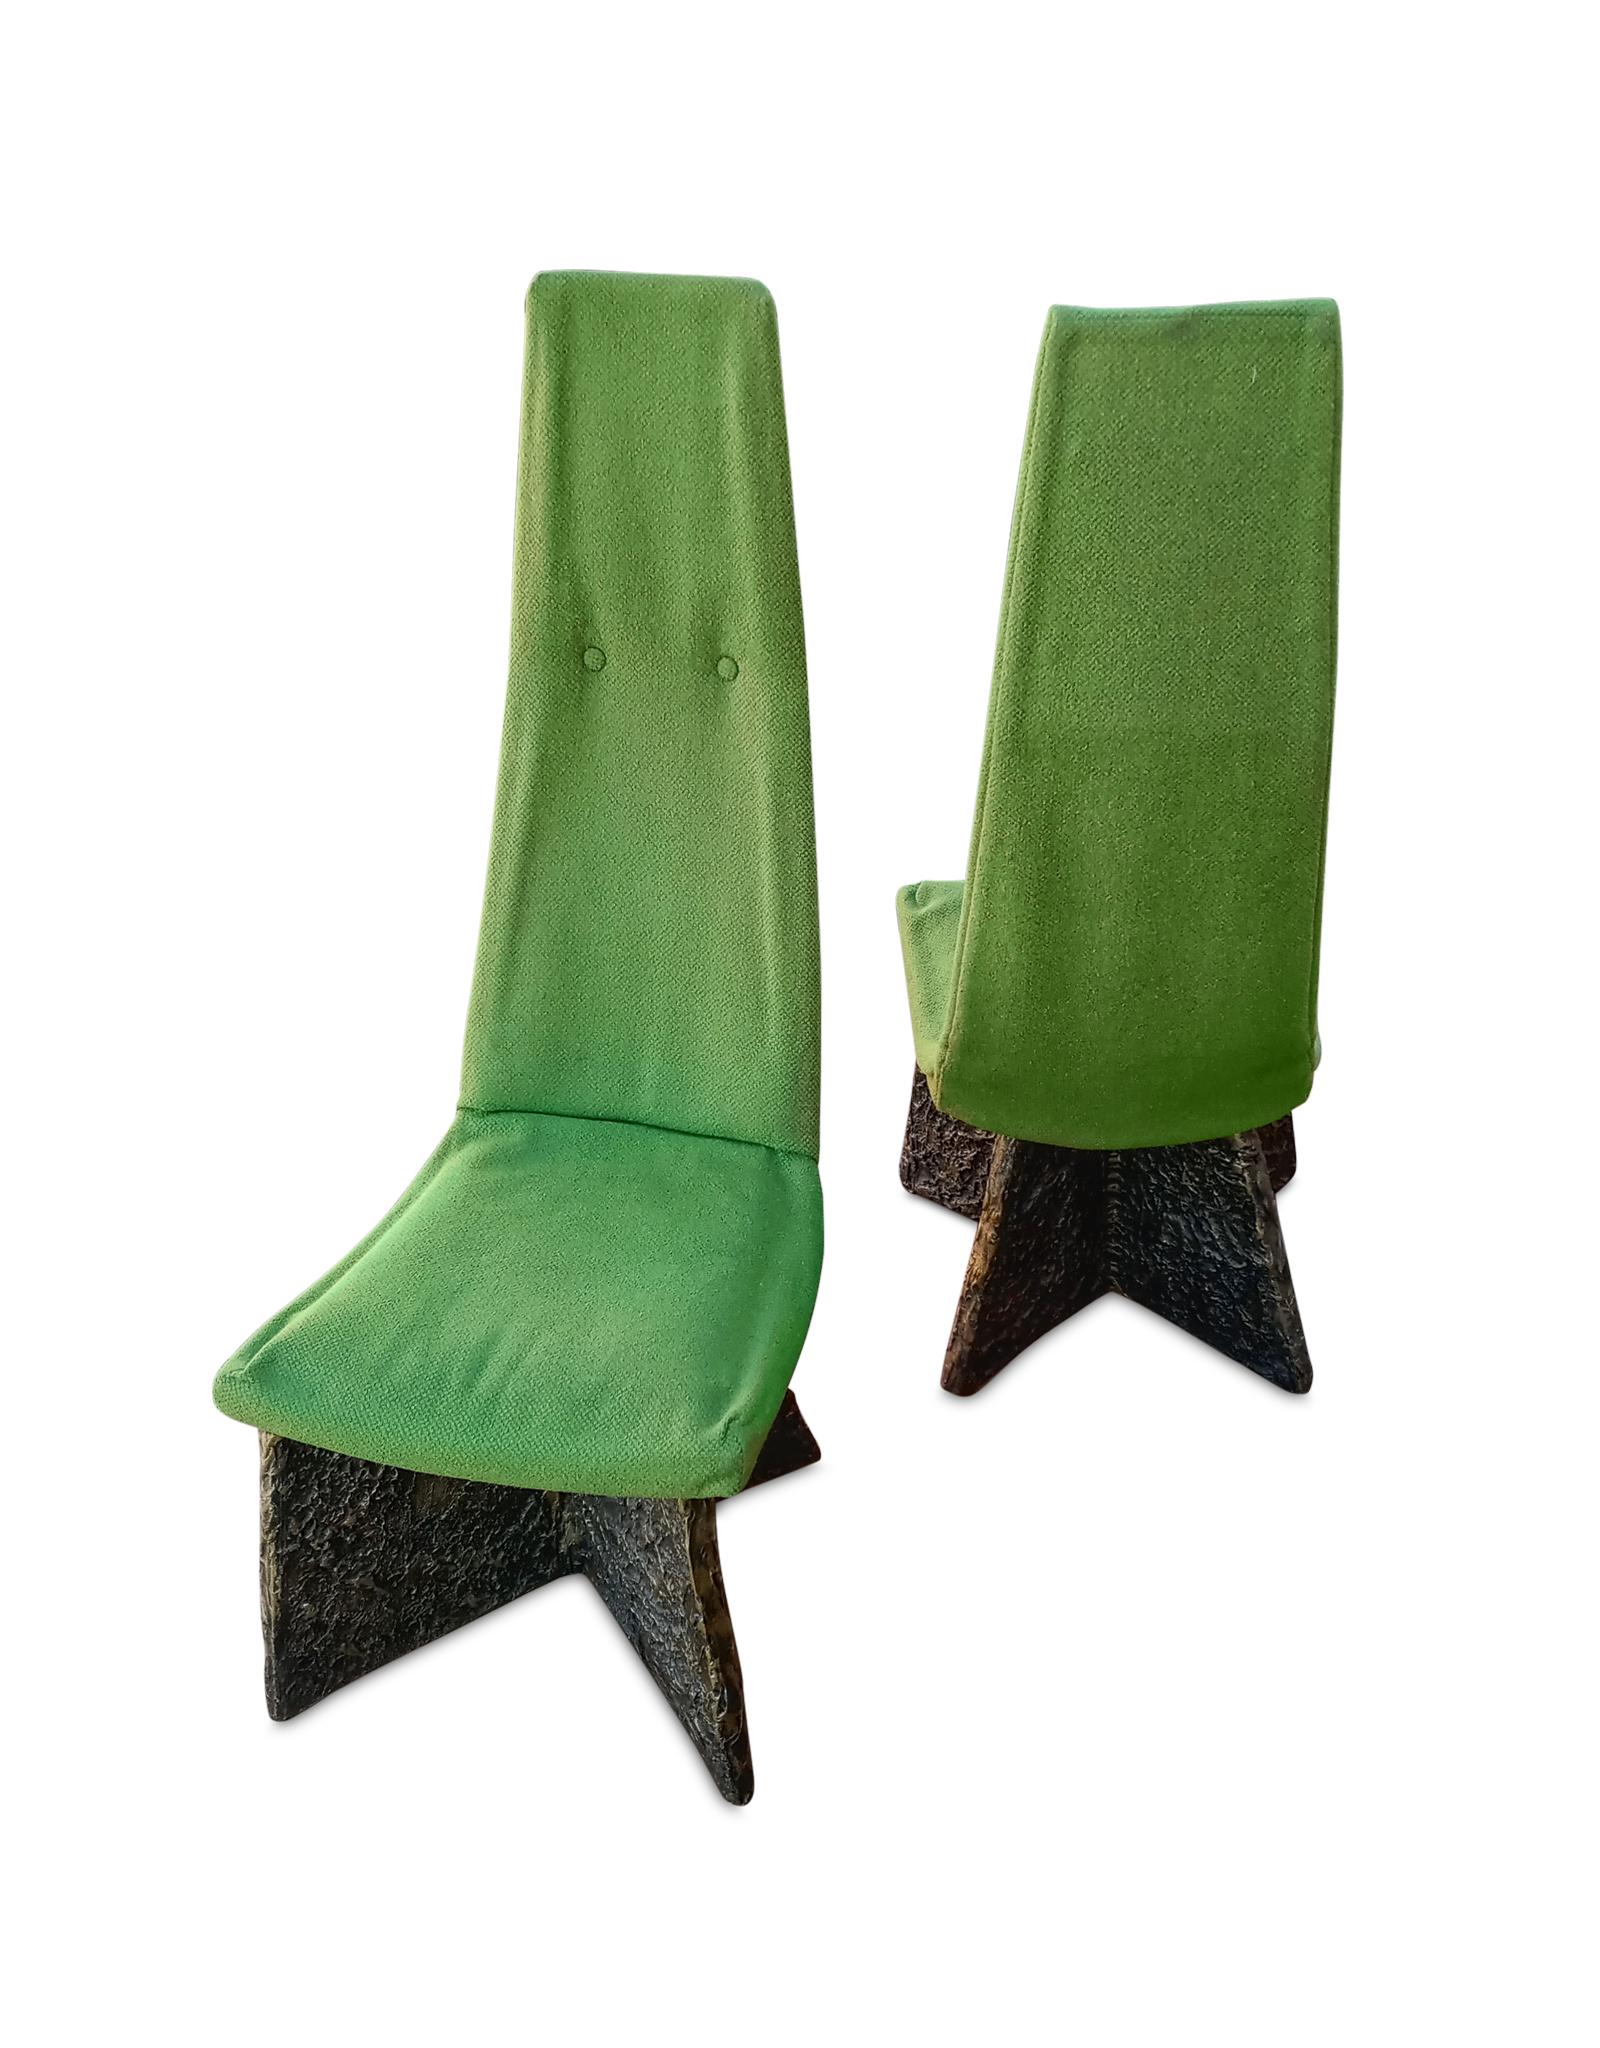 A rare and outstanding pair of Mid-Century Modern Brutalist side-chairs (that can also be used as occasional or lounge) designed by Adrian Pearsall and manufactured by Craft Associates, in the early 1970s. These faceted and gemlike chairs feature